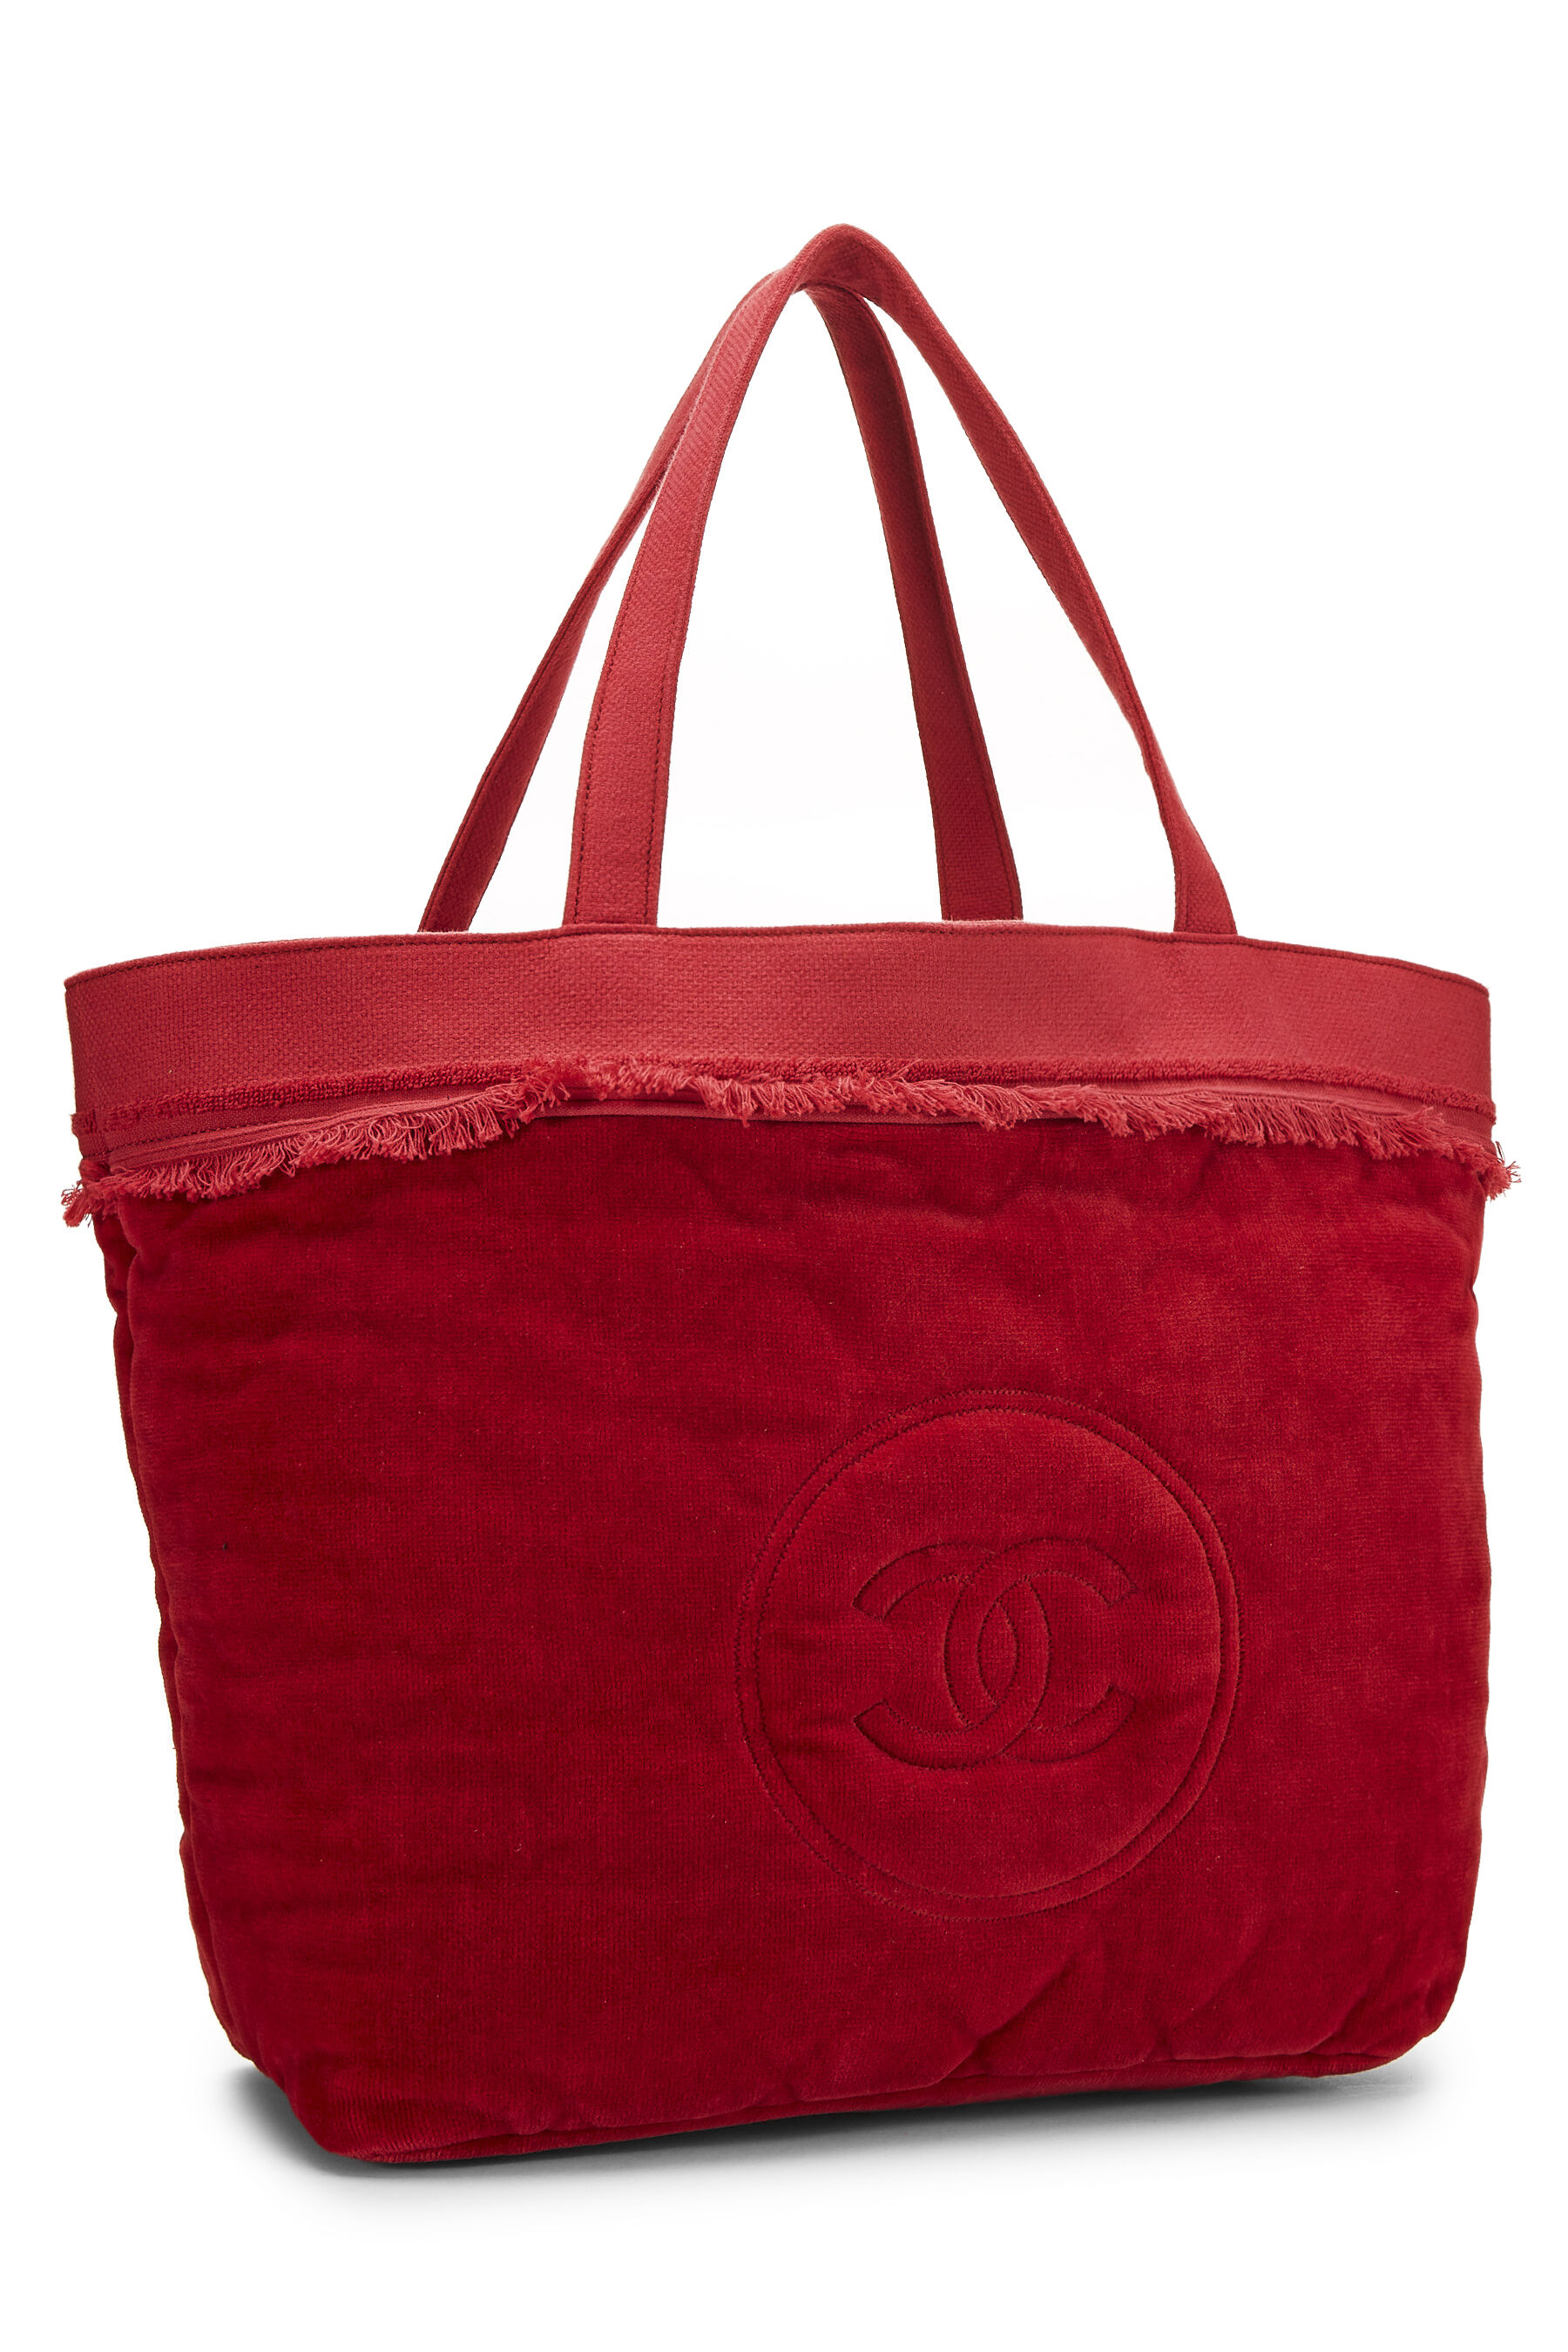 Chanel - Red Terry Cloth 'CC' Tote XL